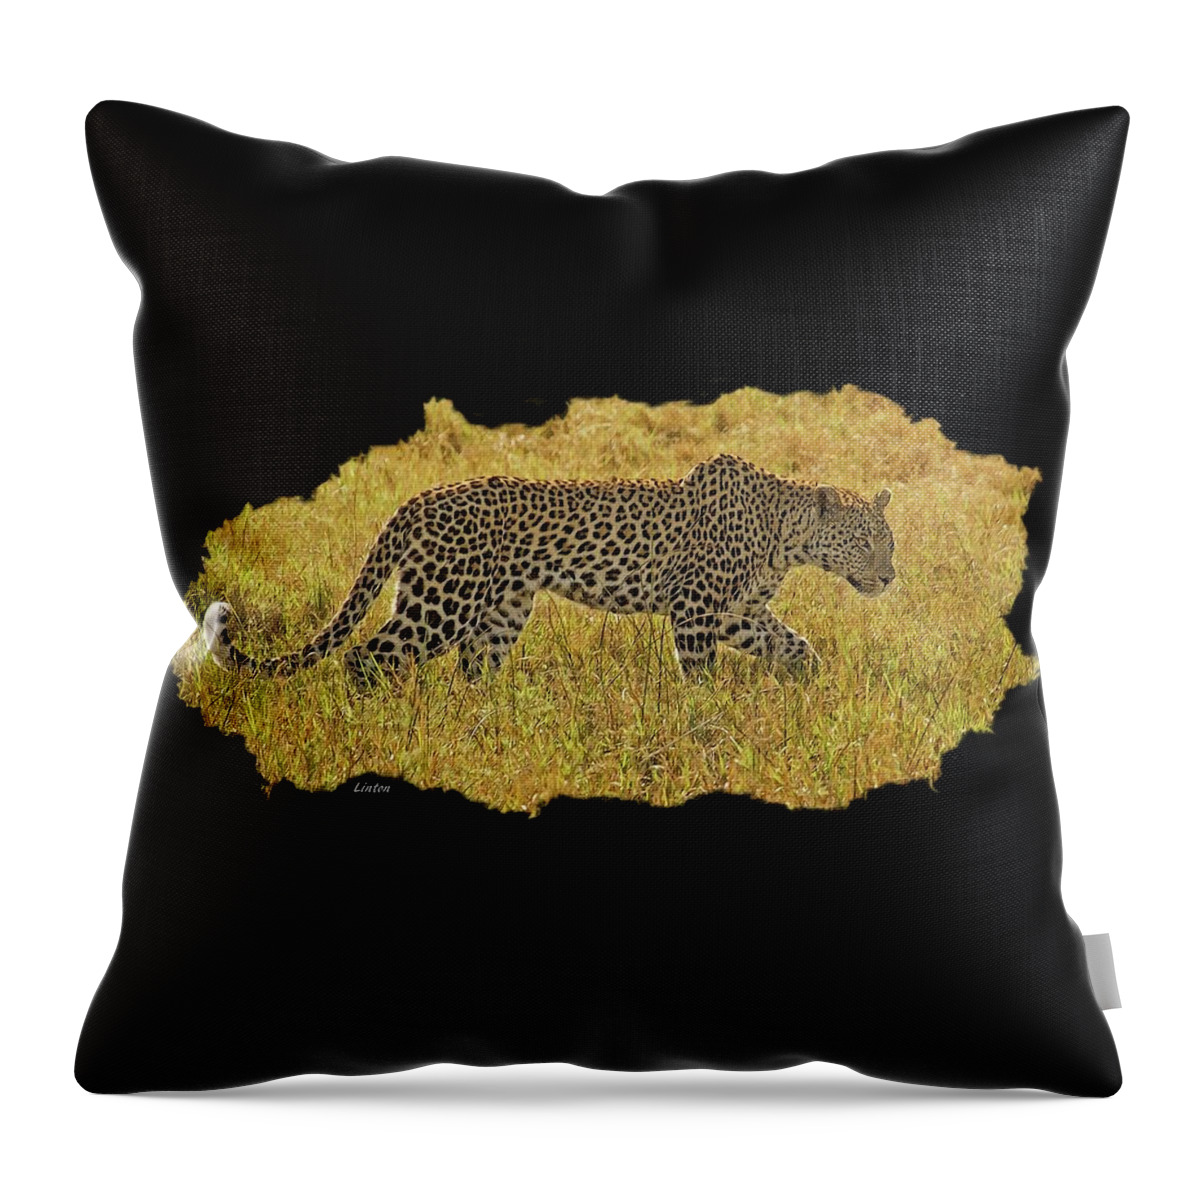 Leopard Throw Pillow featuring the digital art African Leopard 7 by Larry Linton